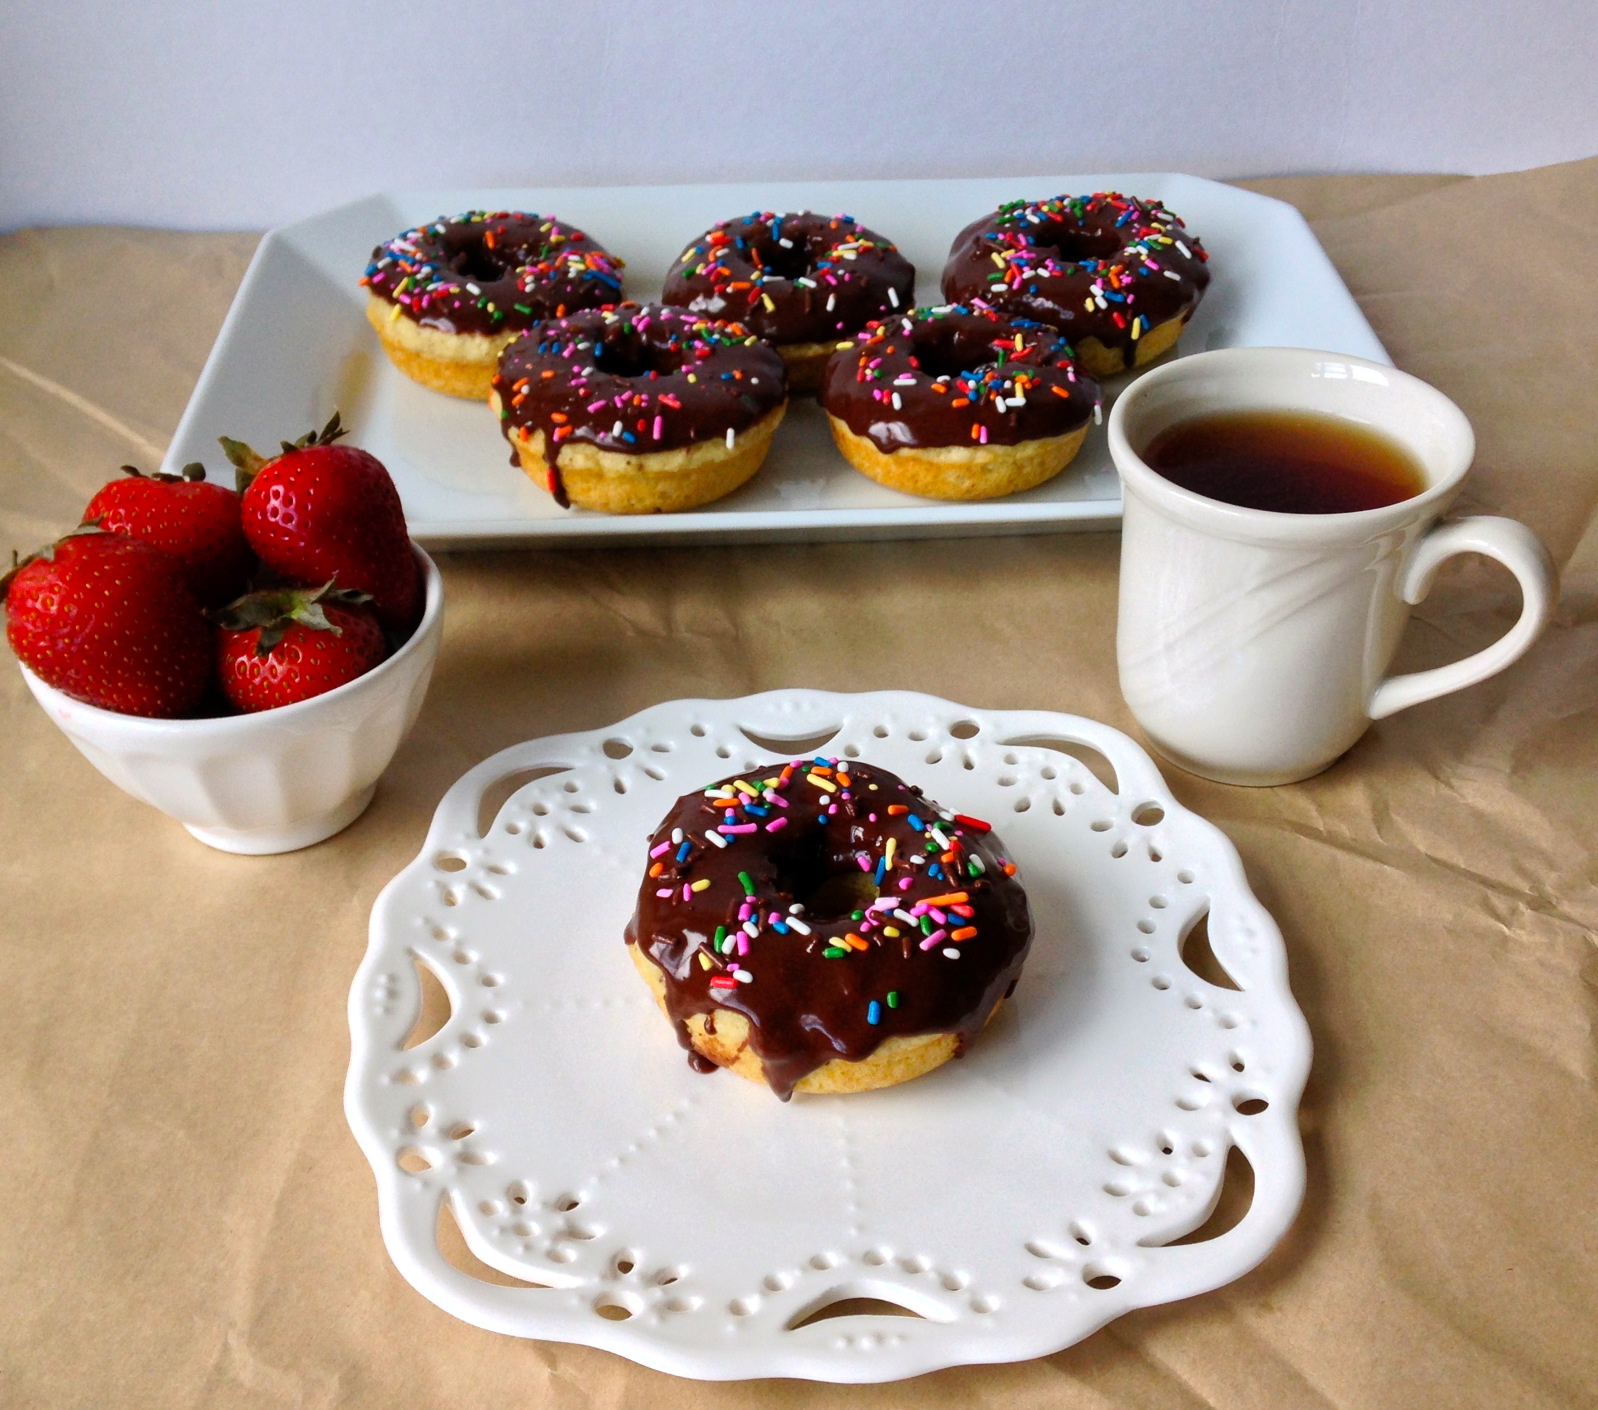 Brown Butter Baked Doughnuts with Chocolate Icing